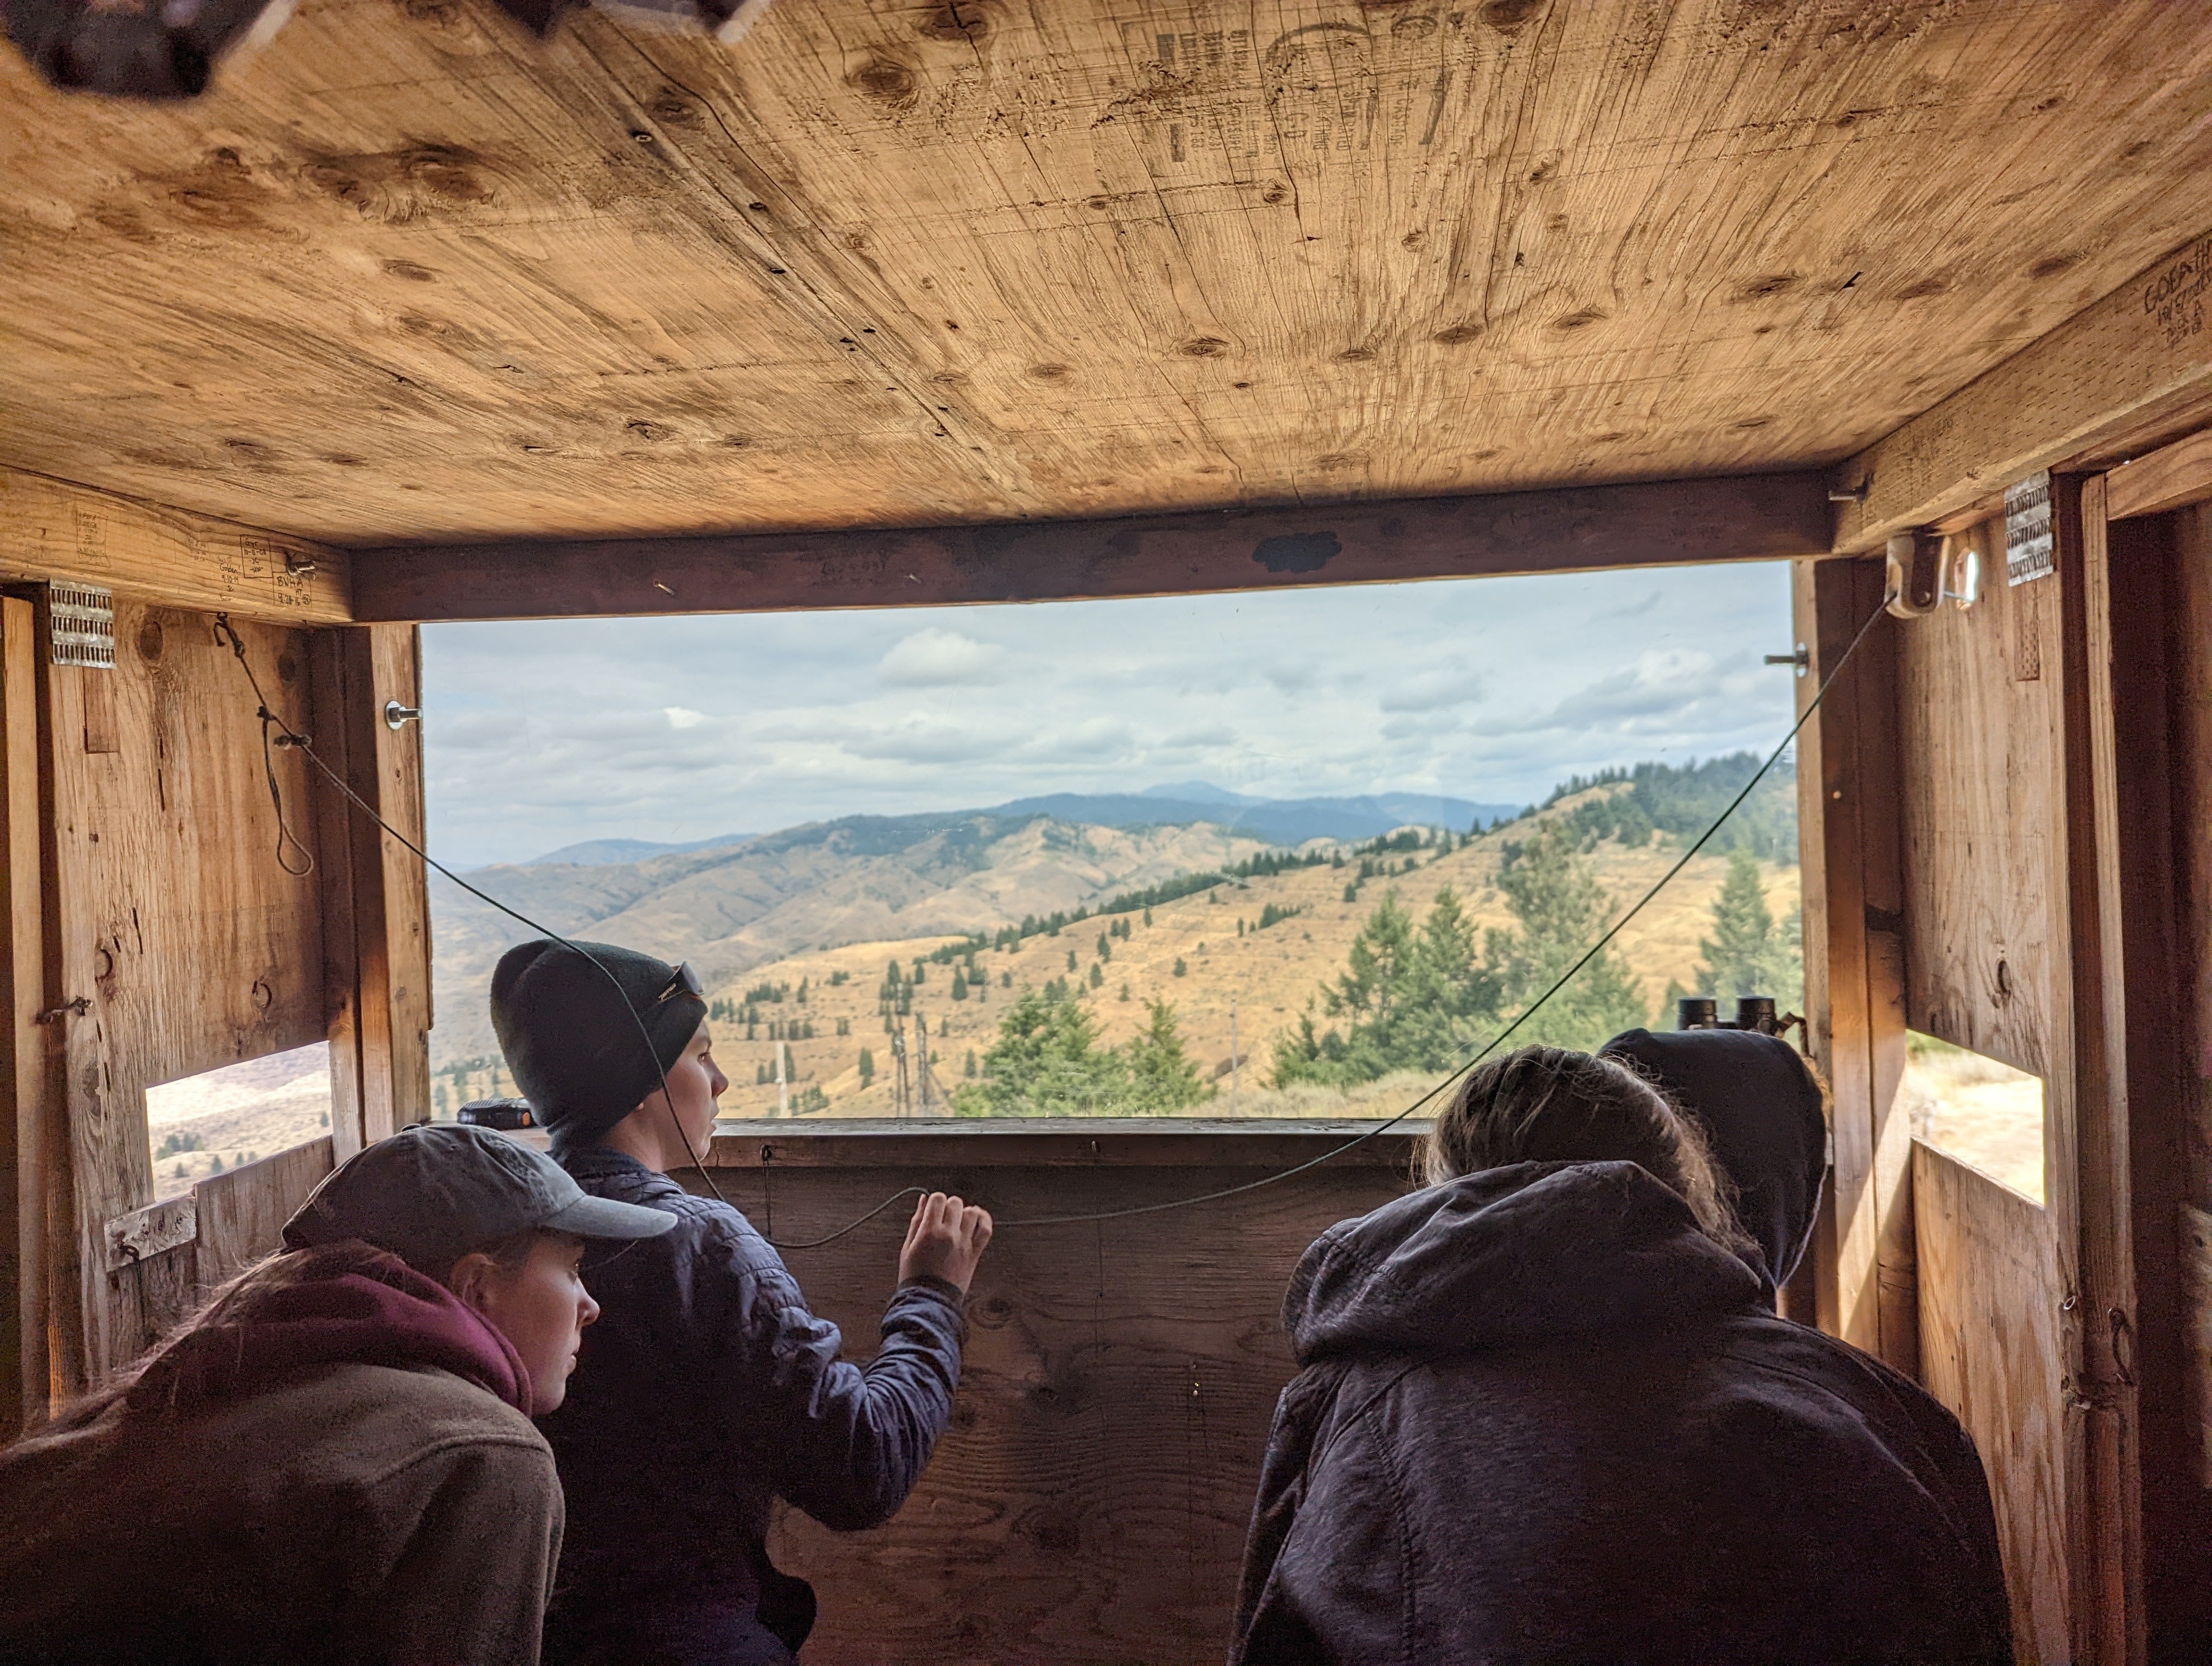 a view from inside the trapping blind looking out. Four people crouch inside a wooden shed, looking out the windows. Through the largest front window you can see a view of the Boise Ridge with mountains, trees, and grassy foothills